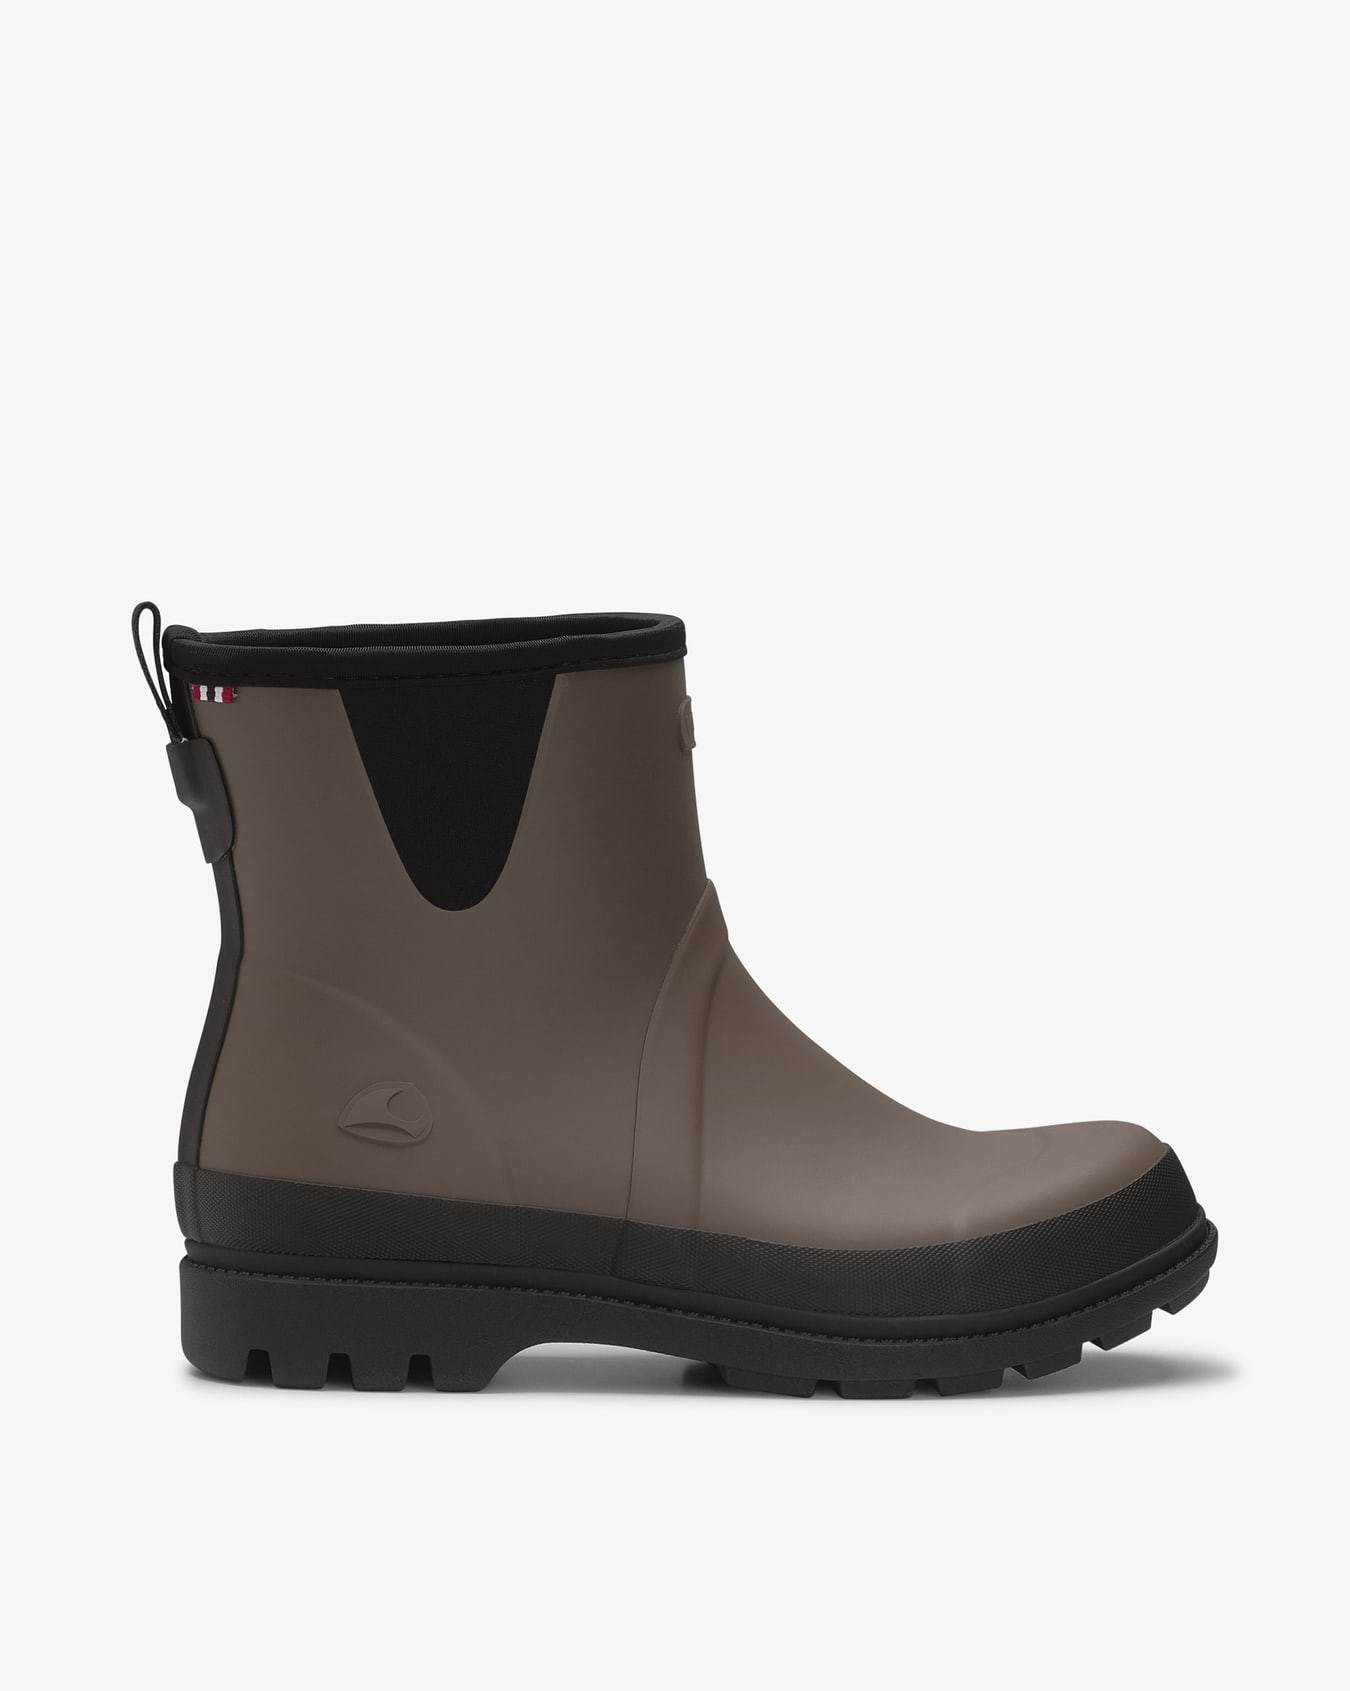 Noble Neo Brown/Black Rubber Boot